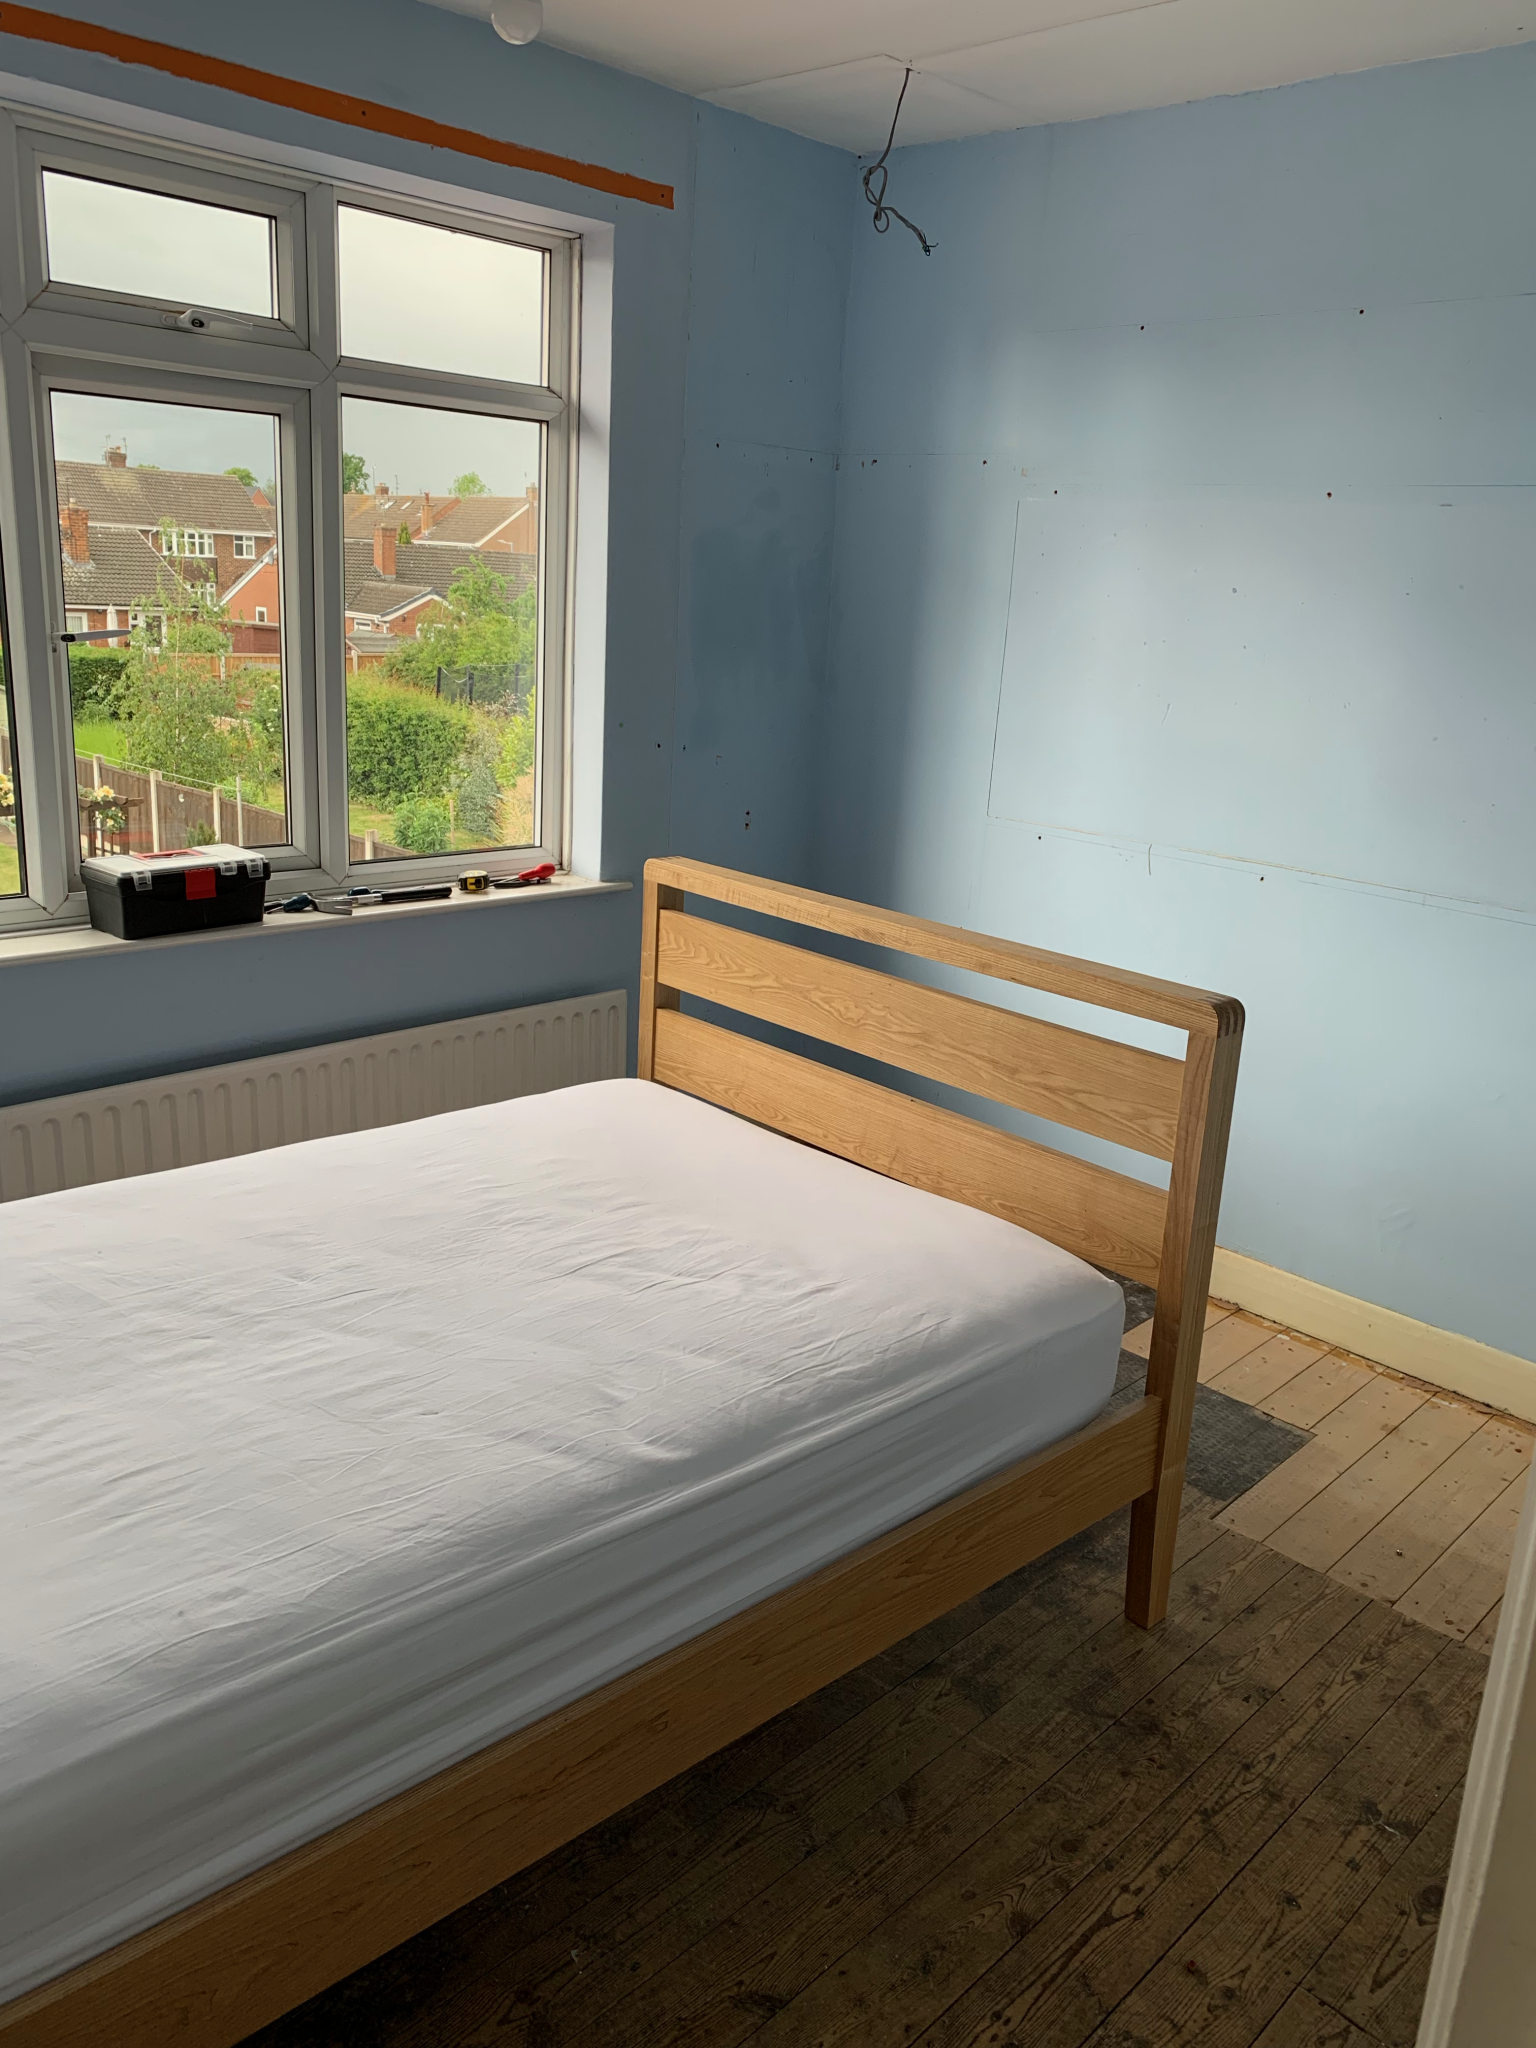 Lucie’s bedroom – our biggest house project, so far